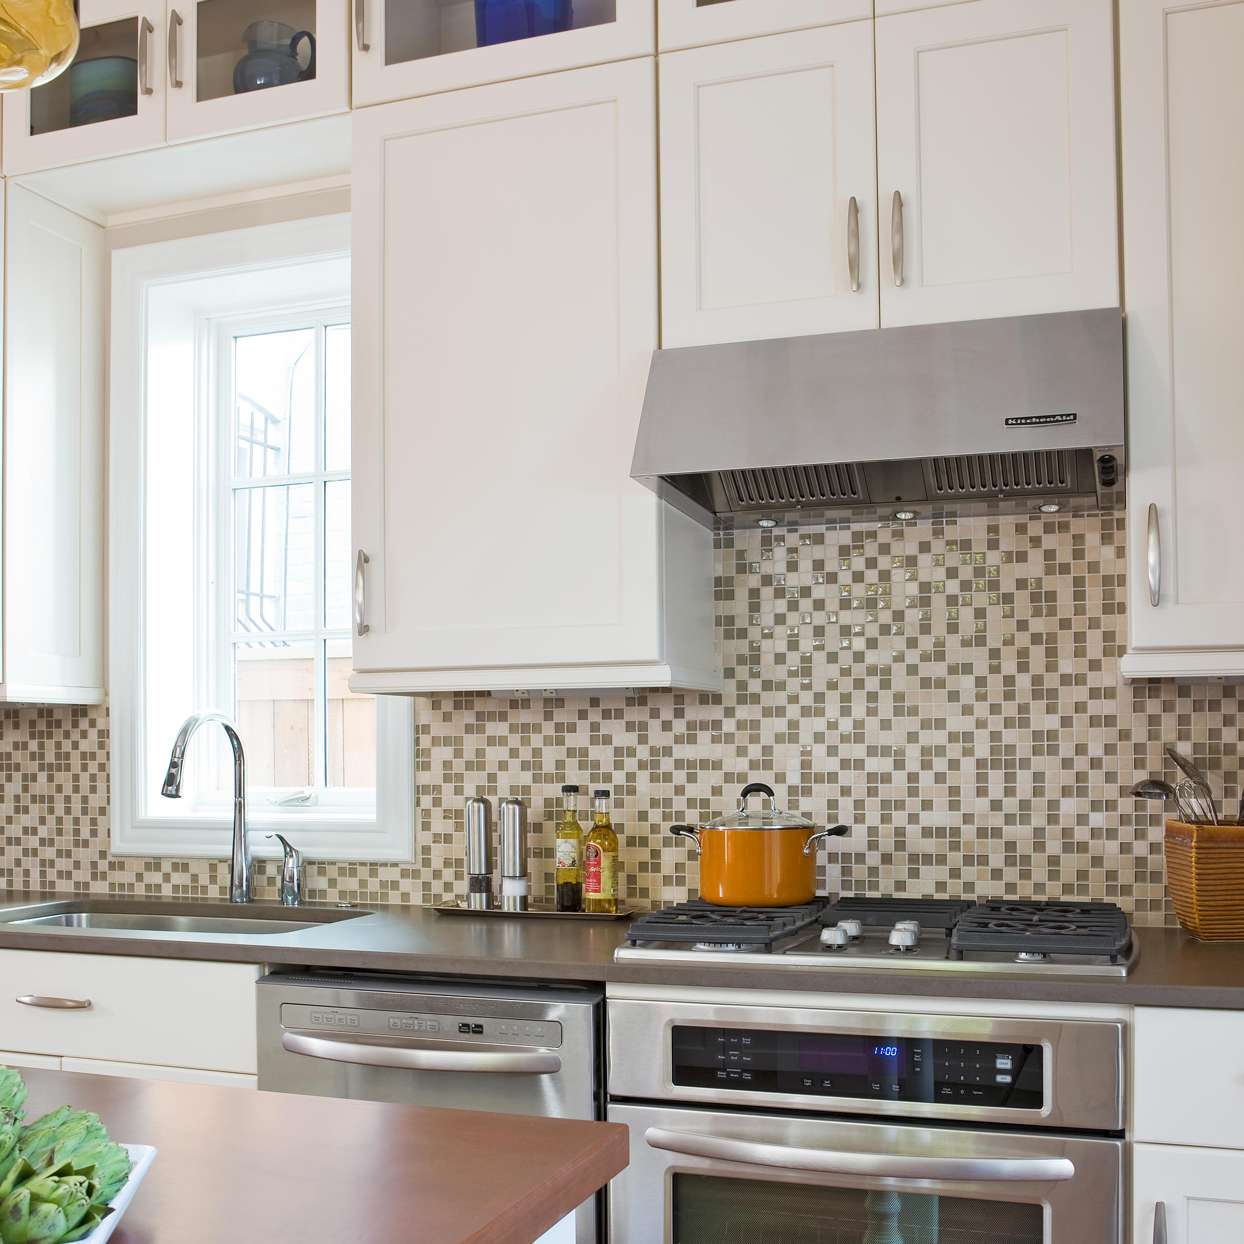 20 Budget Friendly Backsplash Ideas That Only Look Expensive ...